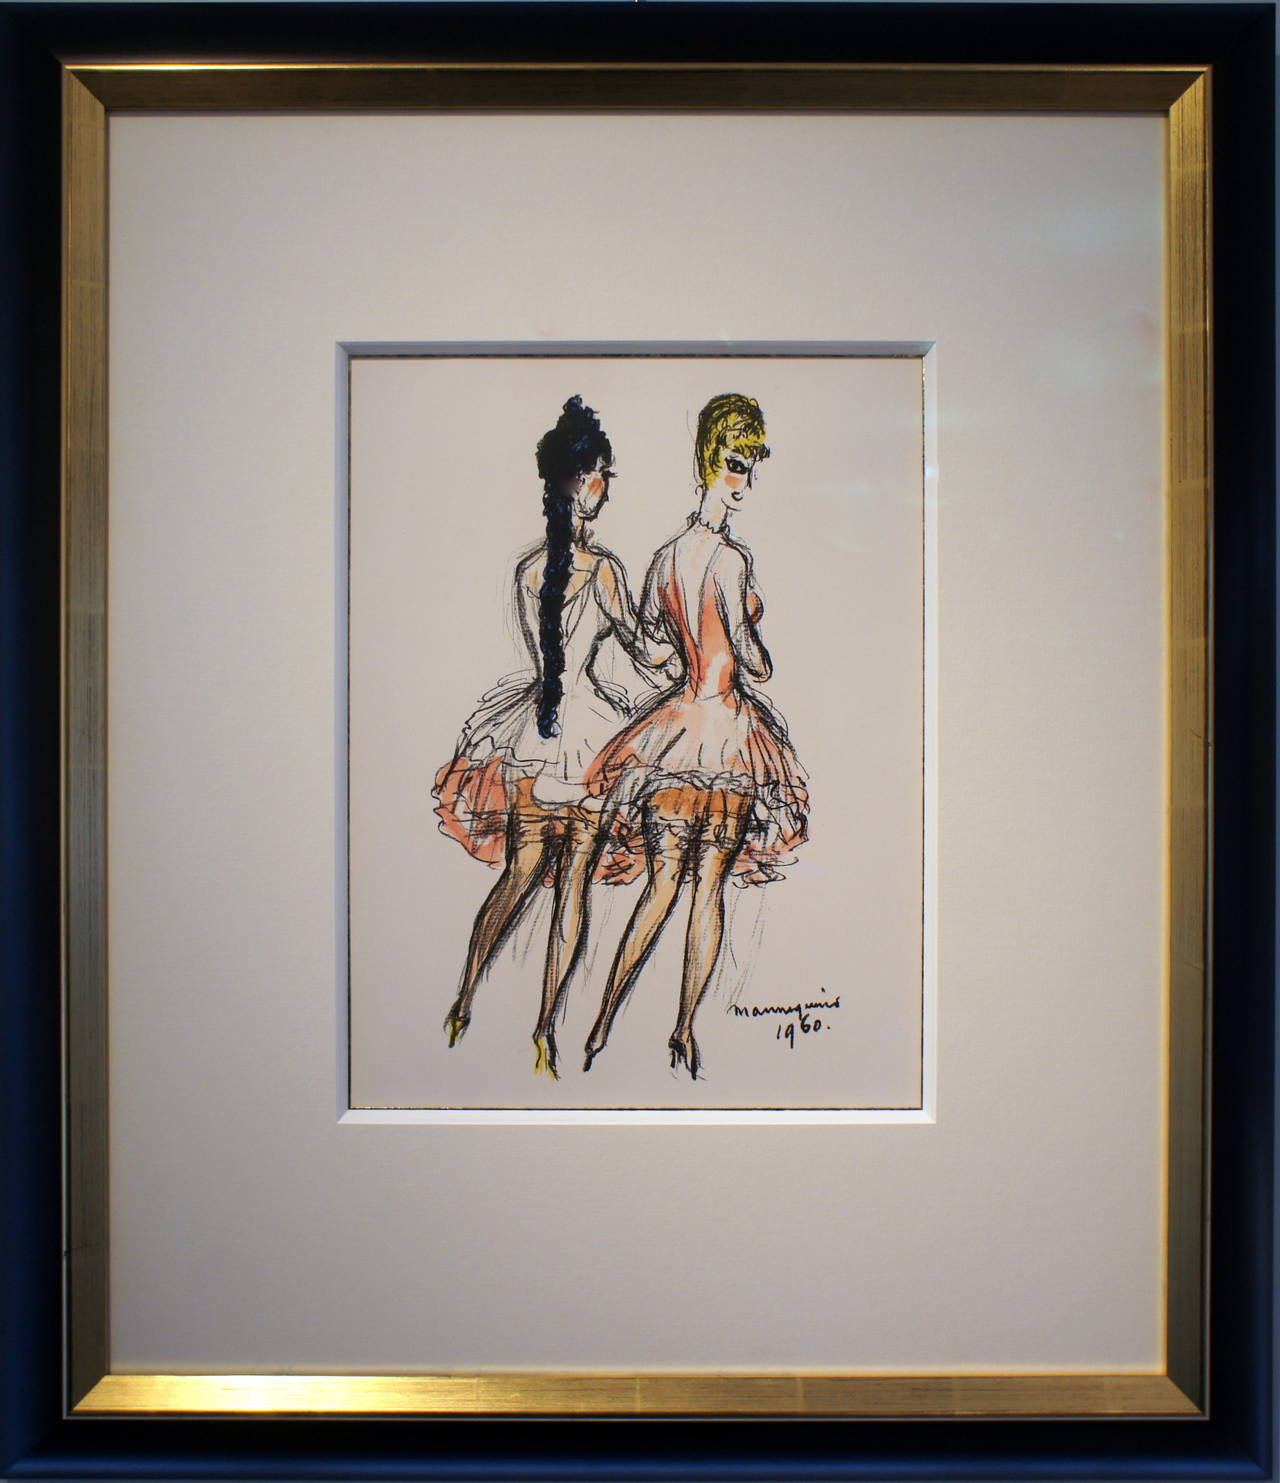 KEES VAN DONGEN - 'MANNEQUINS 1960' - Lithograph, 1960 From the edition for 'Regards sur Paris'. Imagesize: 34 x 21 cm. Illustrated in Juffermans 'Kees van Dongen - The Complete Graphic Work' Nr. JL 33